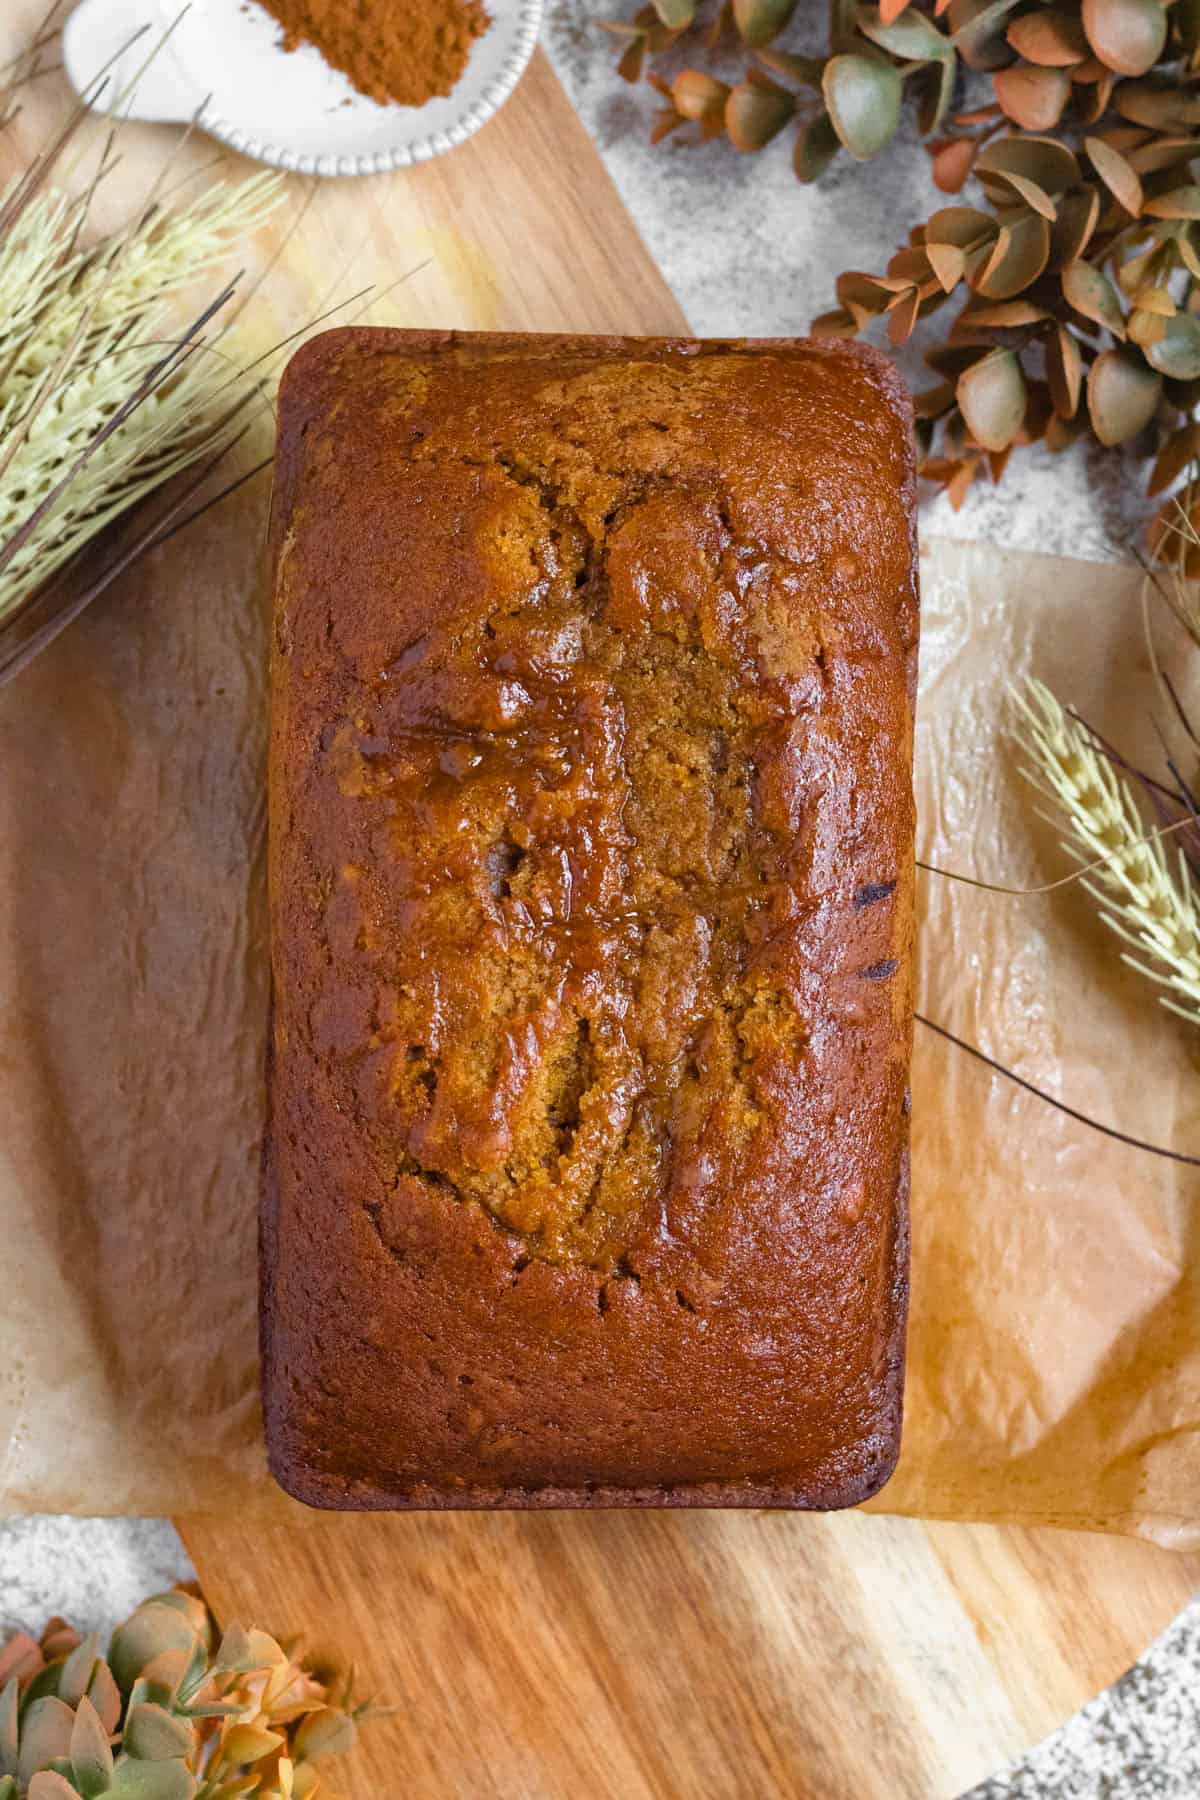 Top view of a baked pumpkin bread loaf.